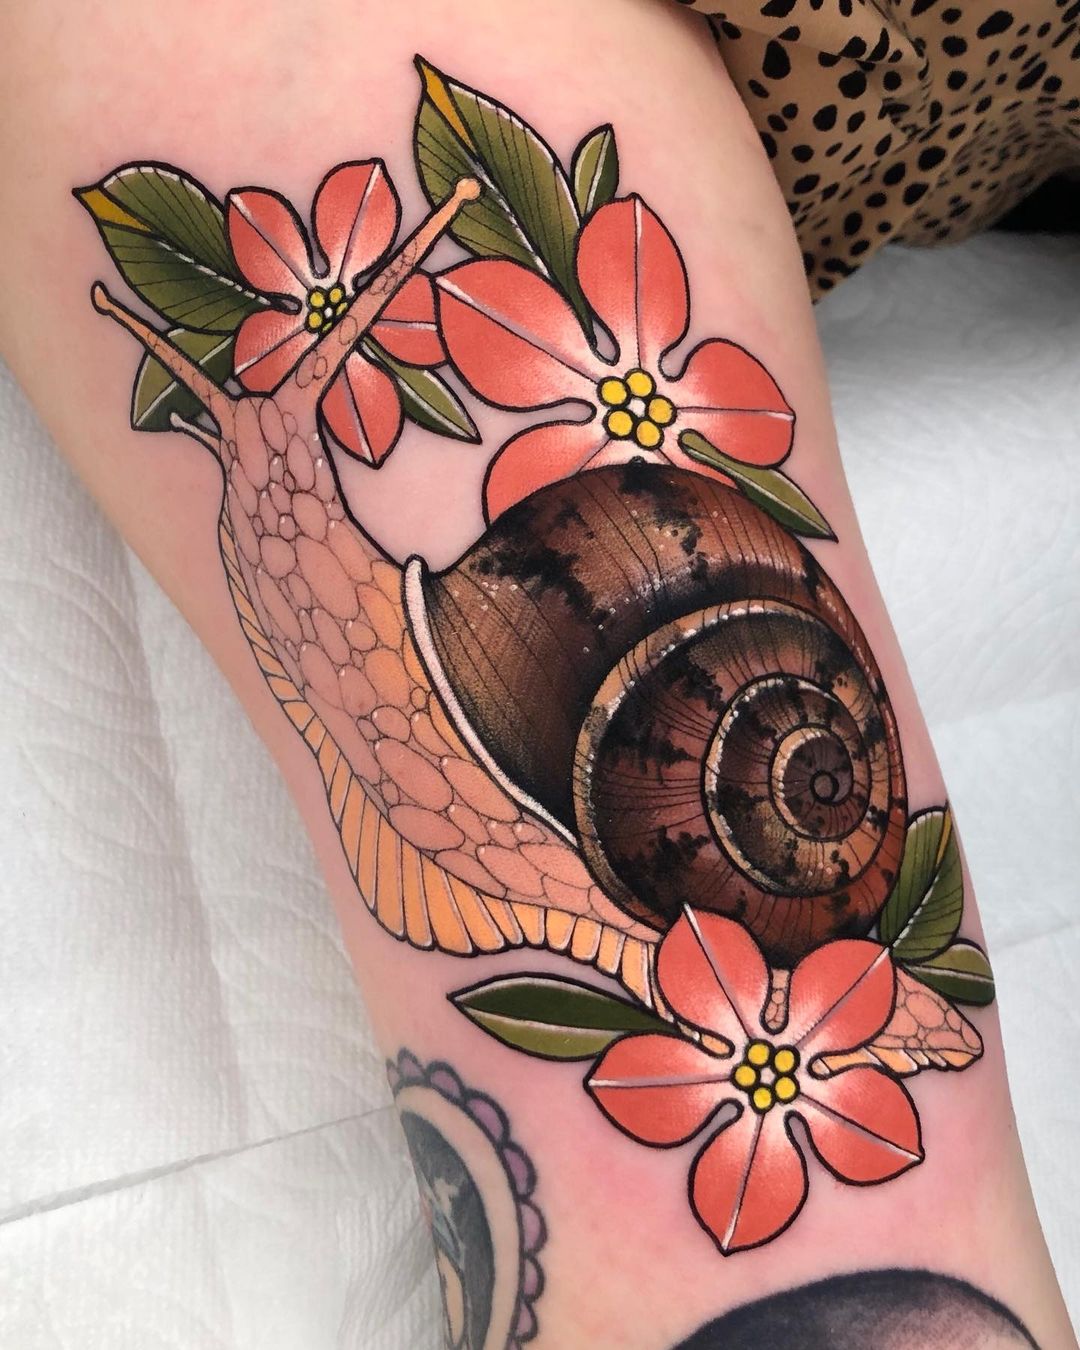 The Tattoo Movement  Neotraditional mushroom snail by Bubsy who is  currently working out of our Enmore studio Bubsy specialises in traditional   neo traditional tattooing producing super clean and solid tattoos